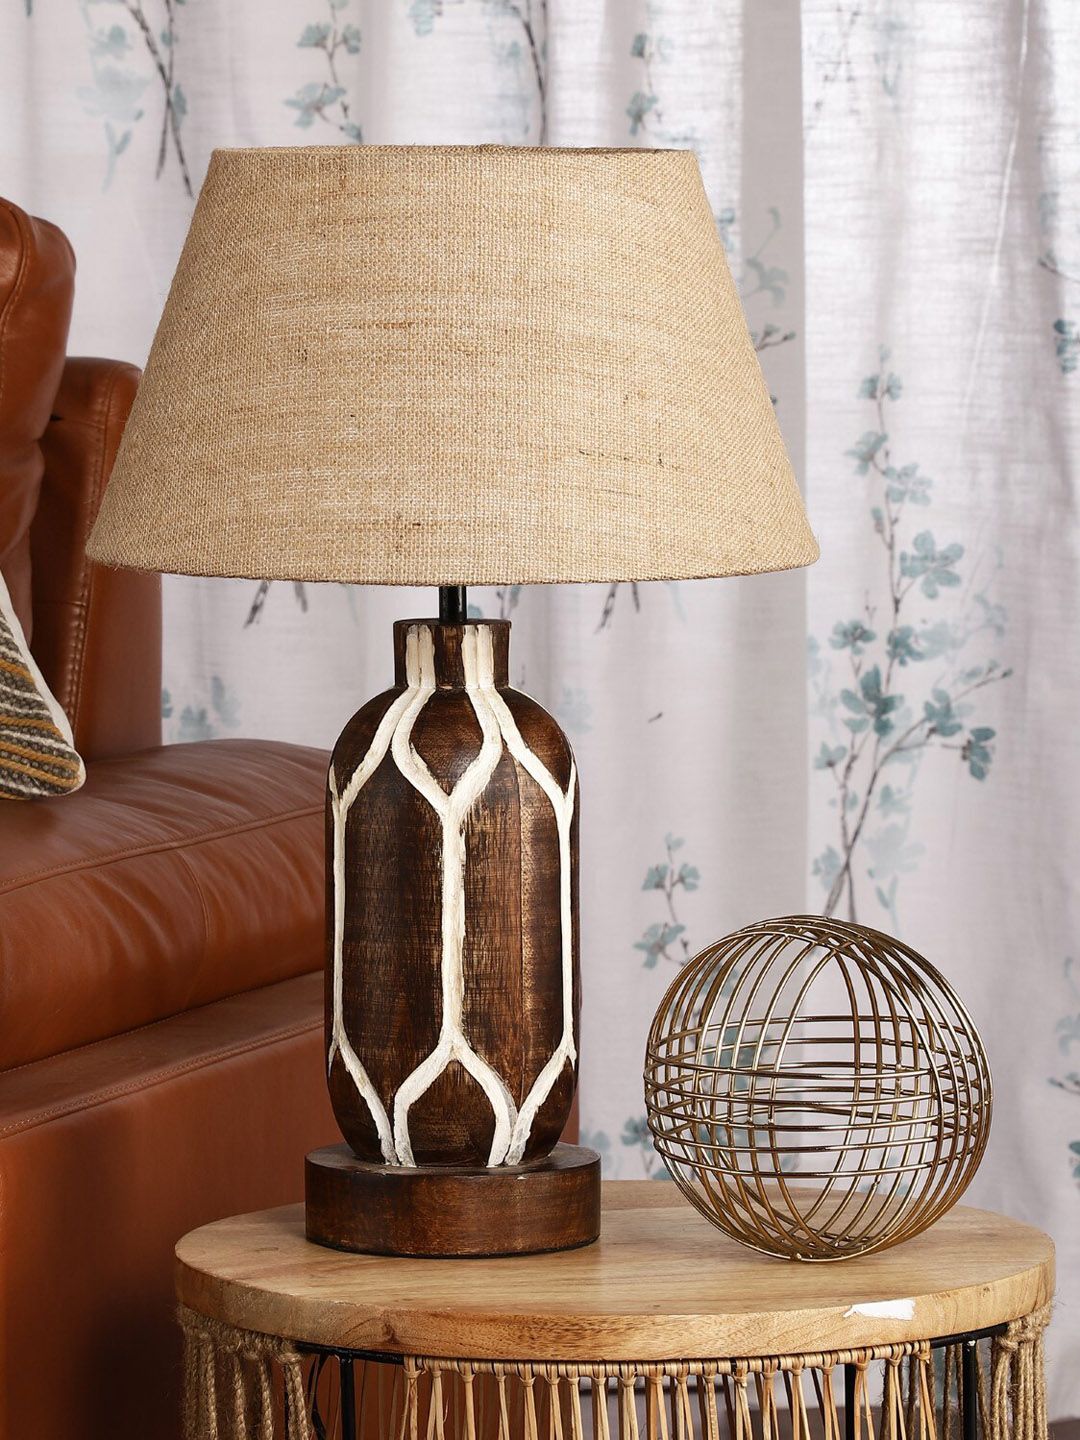 The Decor Mart Engraved Walnut Table Lamp With Jute Shade Price in India